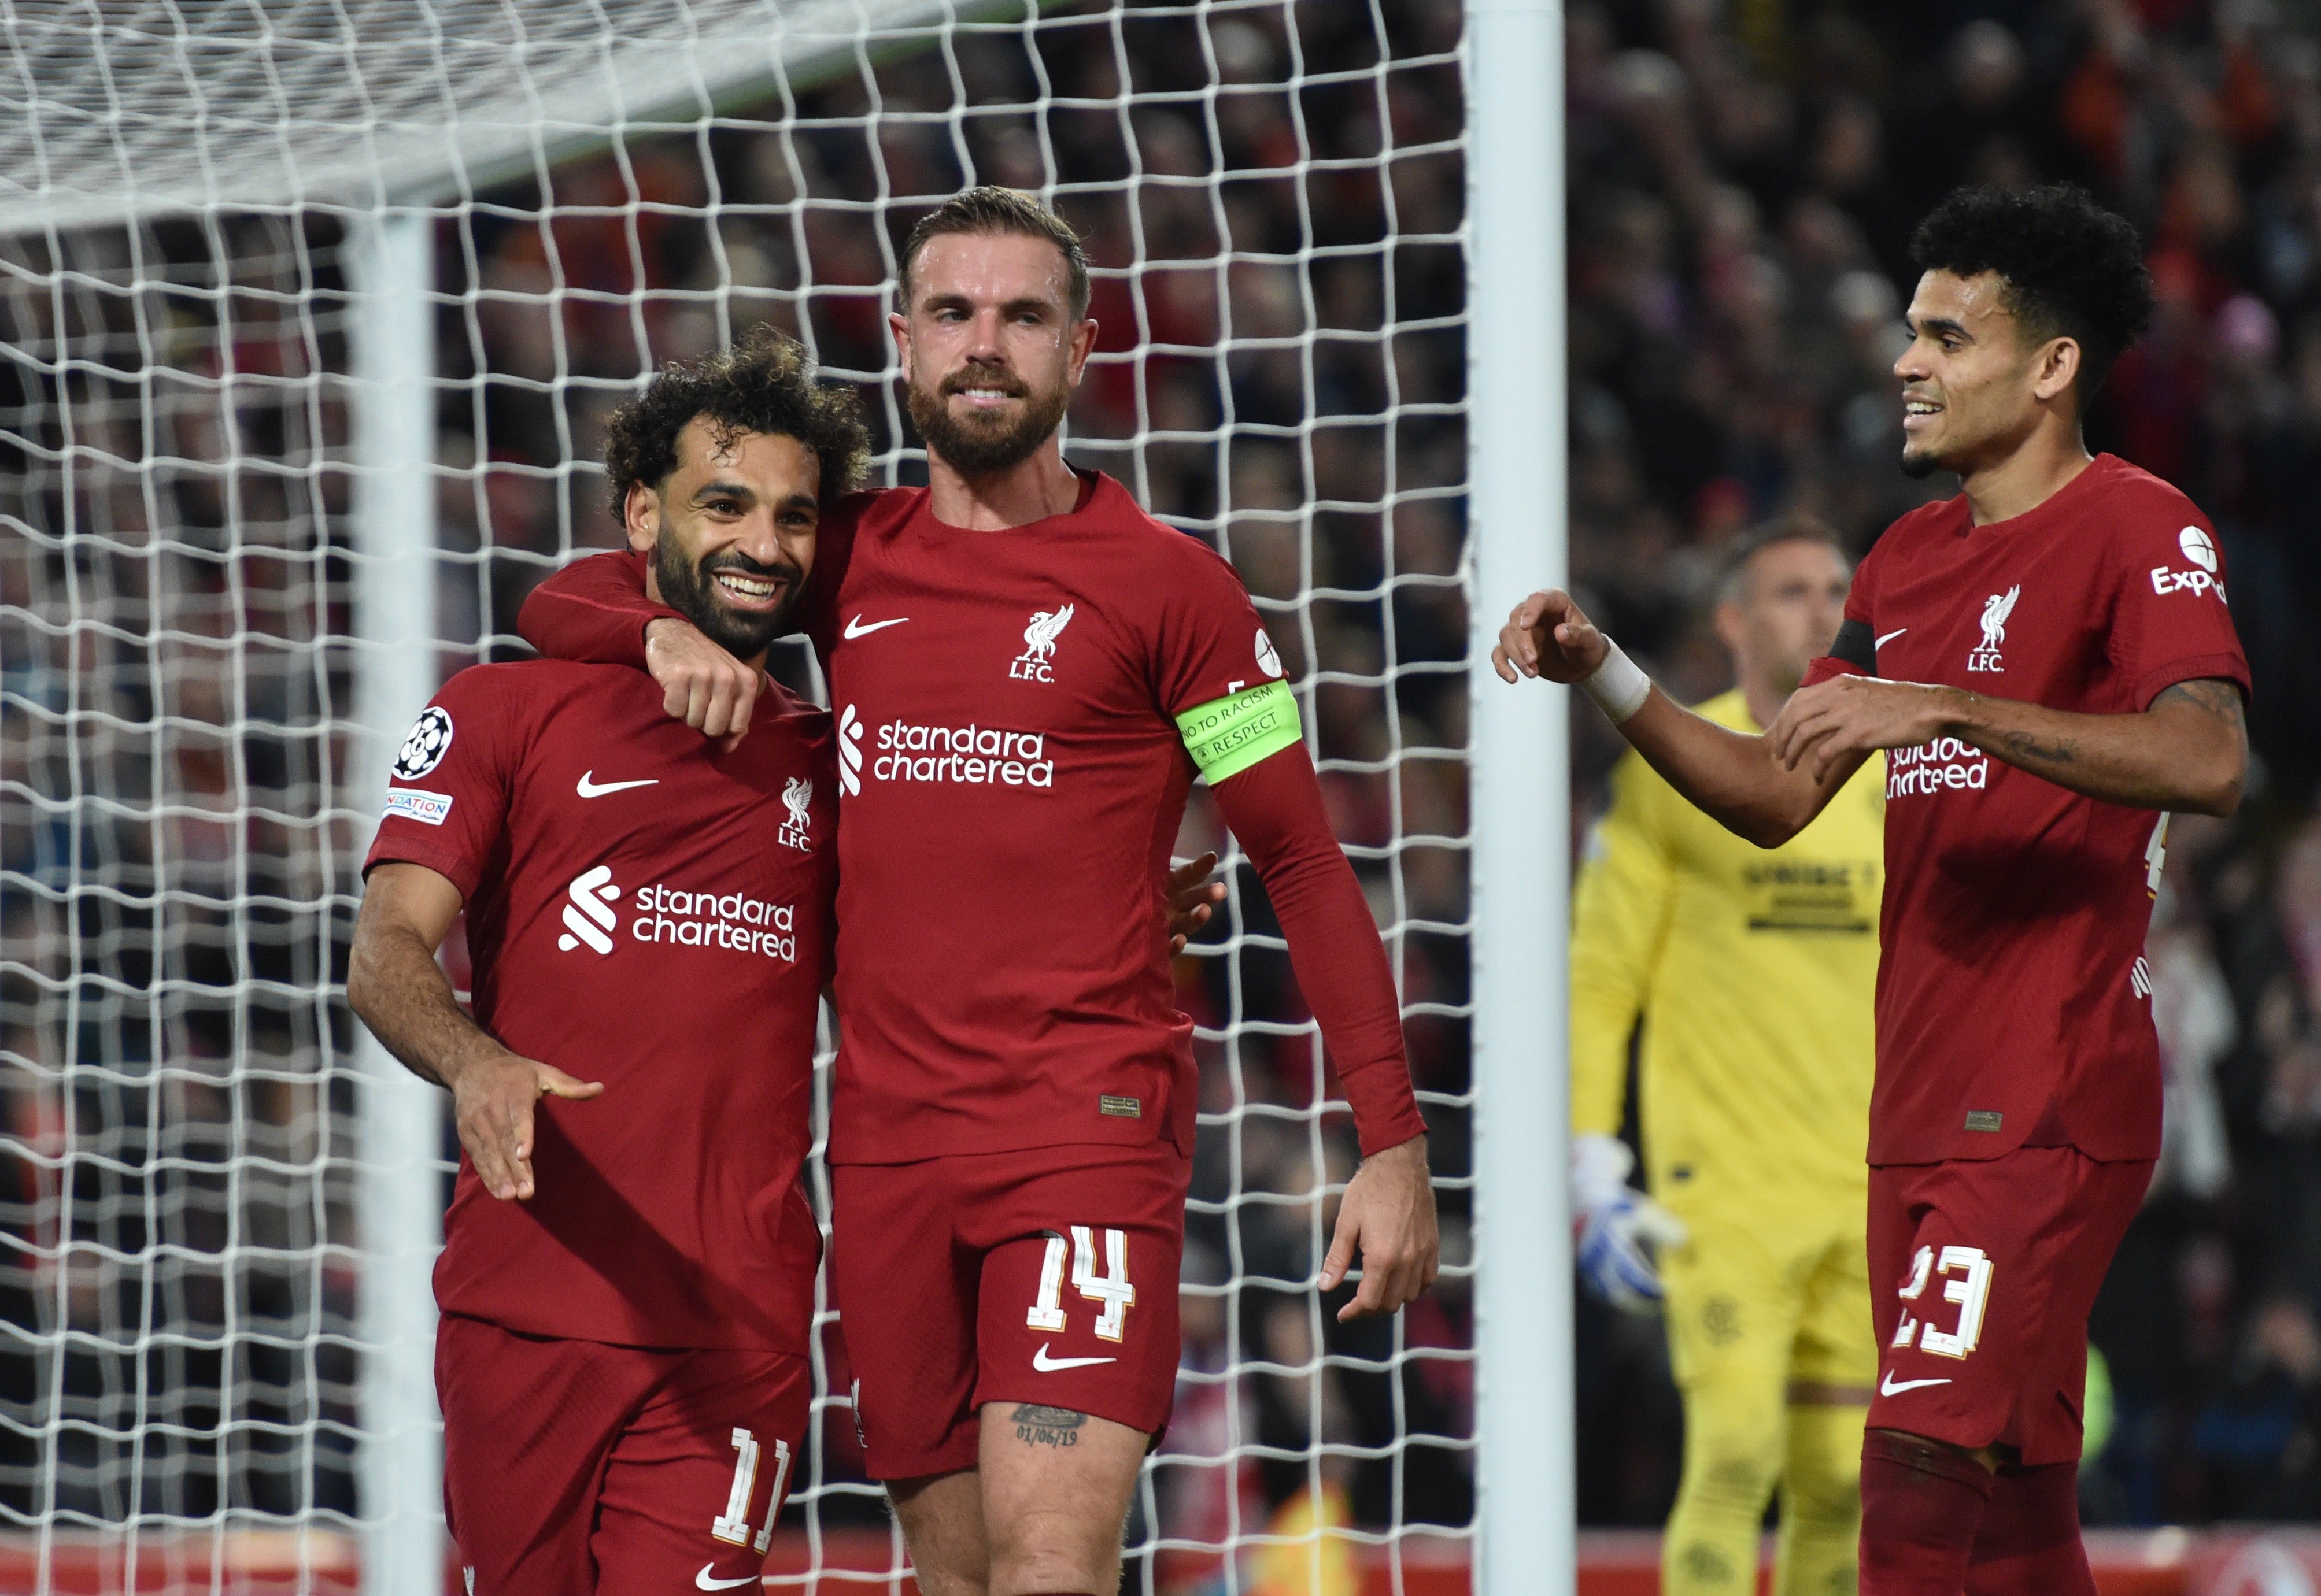 Mohamed Salah celebrates after scoring the second goal against Rangers at Anfield